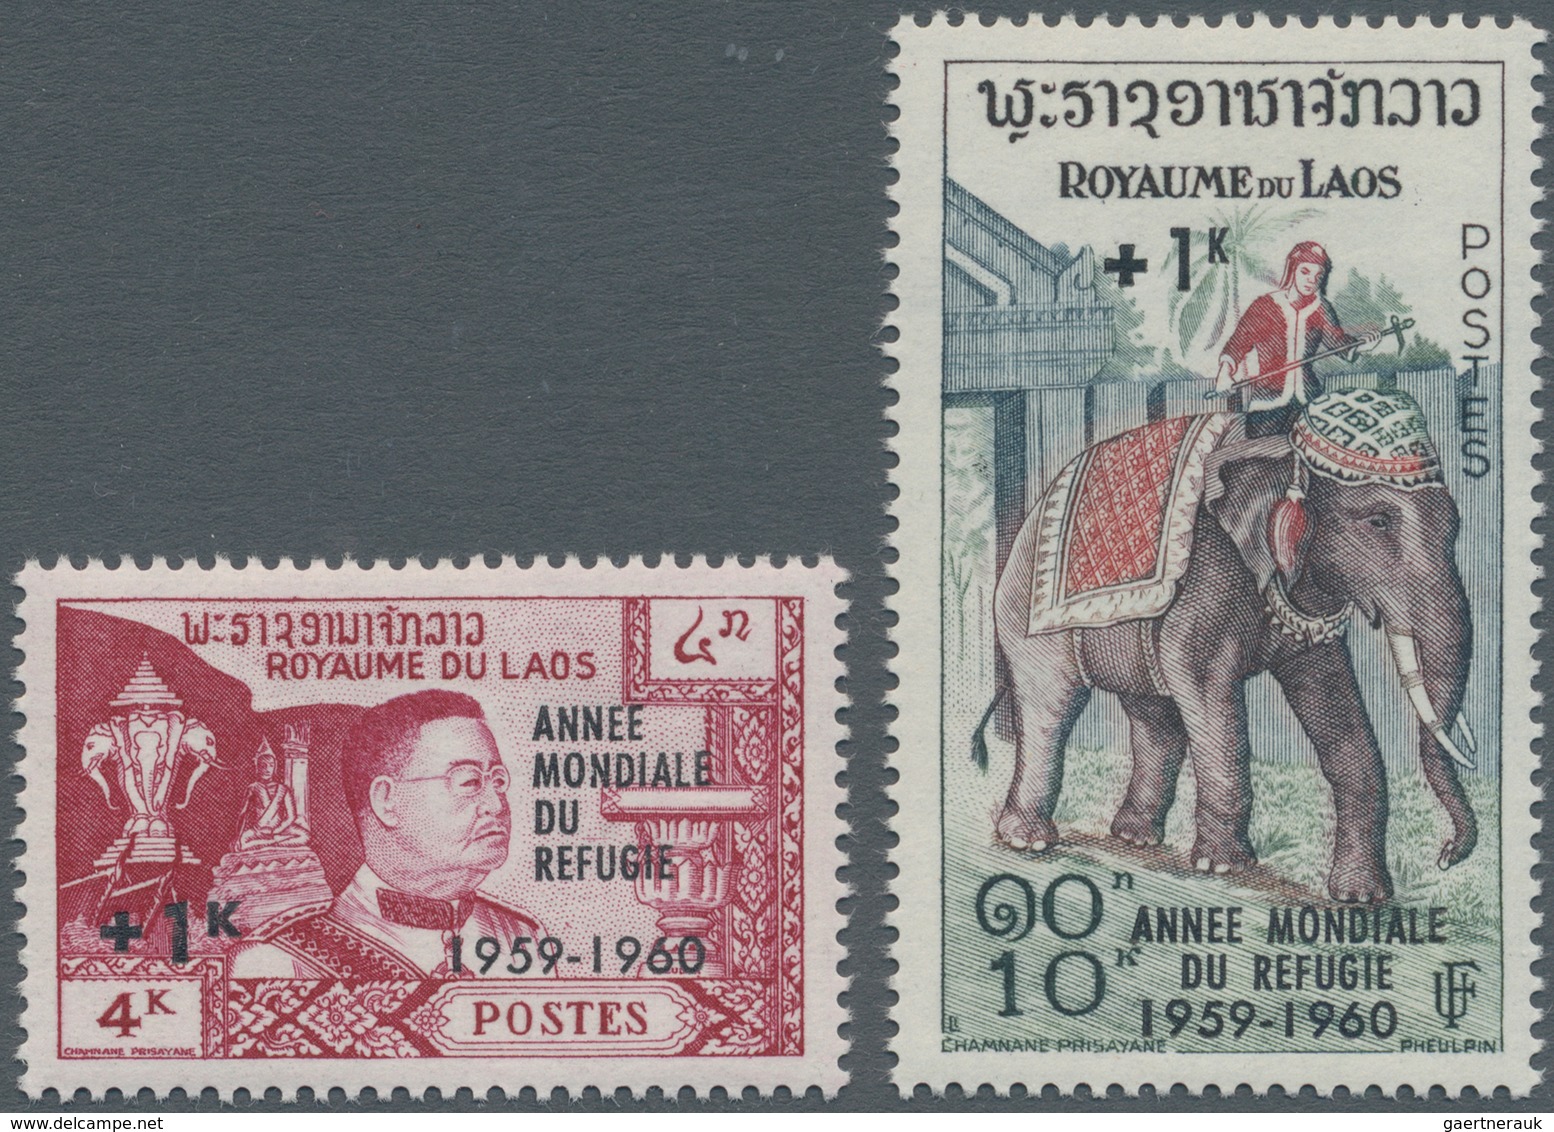 Laos: 1960, World Refugees Year Set Of Two Surcharged Stamps Incl. 4+1k. King Sisavang Vong And 10+1 - Laos